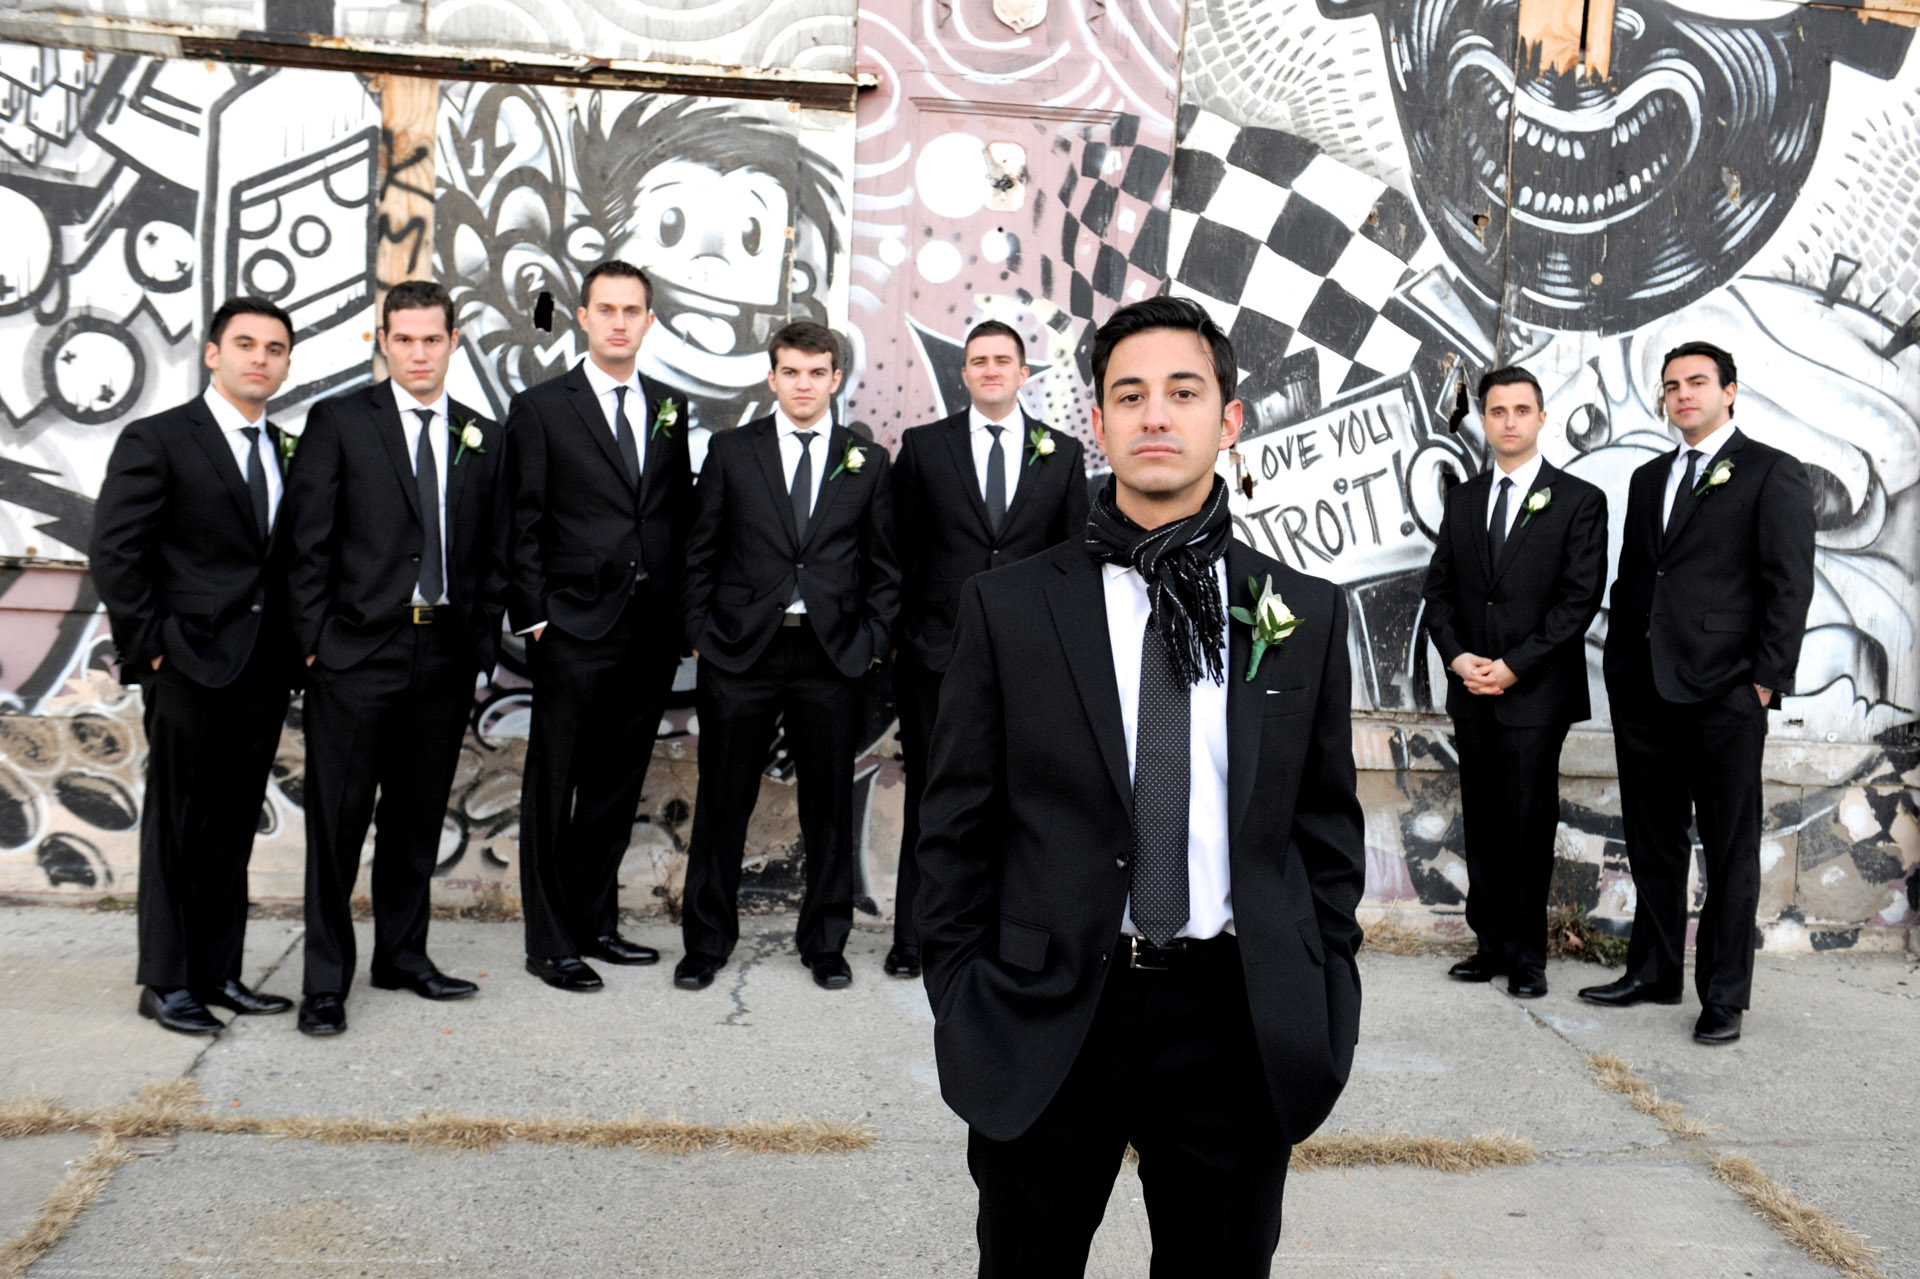 The Historic church Sweetest Heart of Mary and the Dearborn Inn of Detroit's historic church in Detroit and Dearborn, Michigan wedding photographer's  photo of the groom and his groomsmen near the Detroit's historic train station for wedding photos in Detroit, Michigan with local graffiti art.